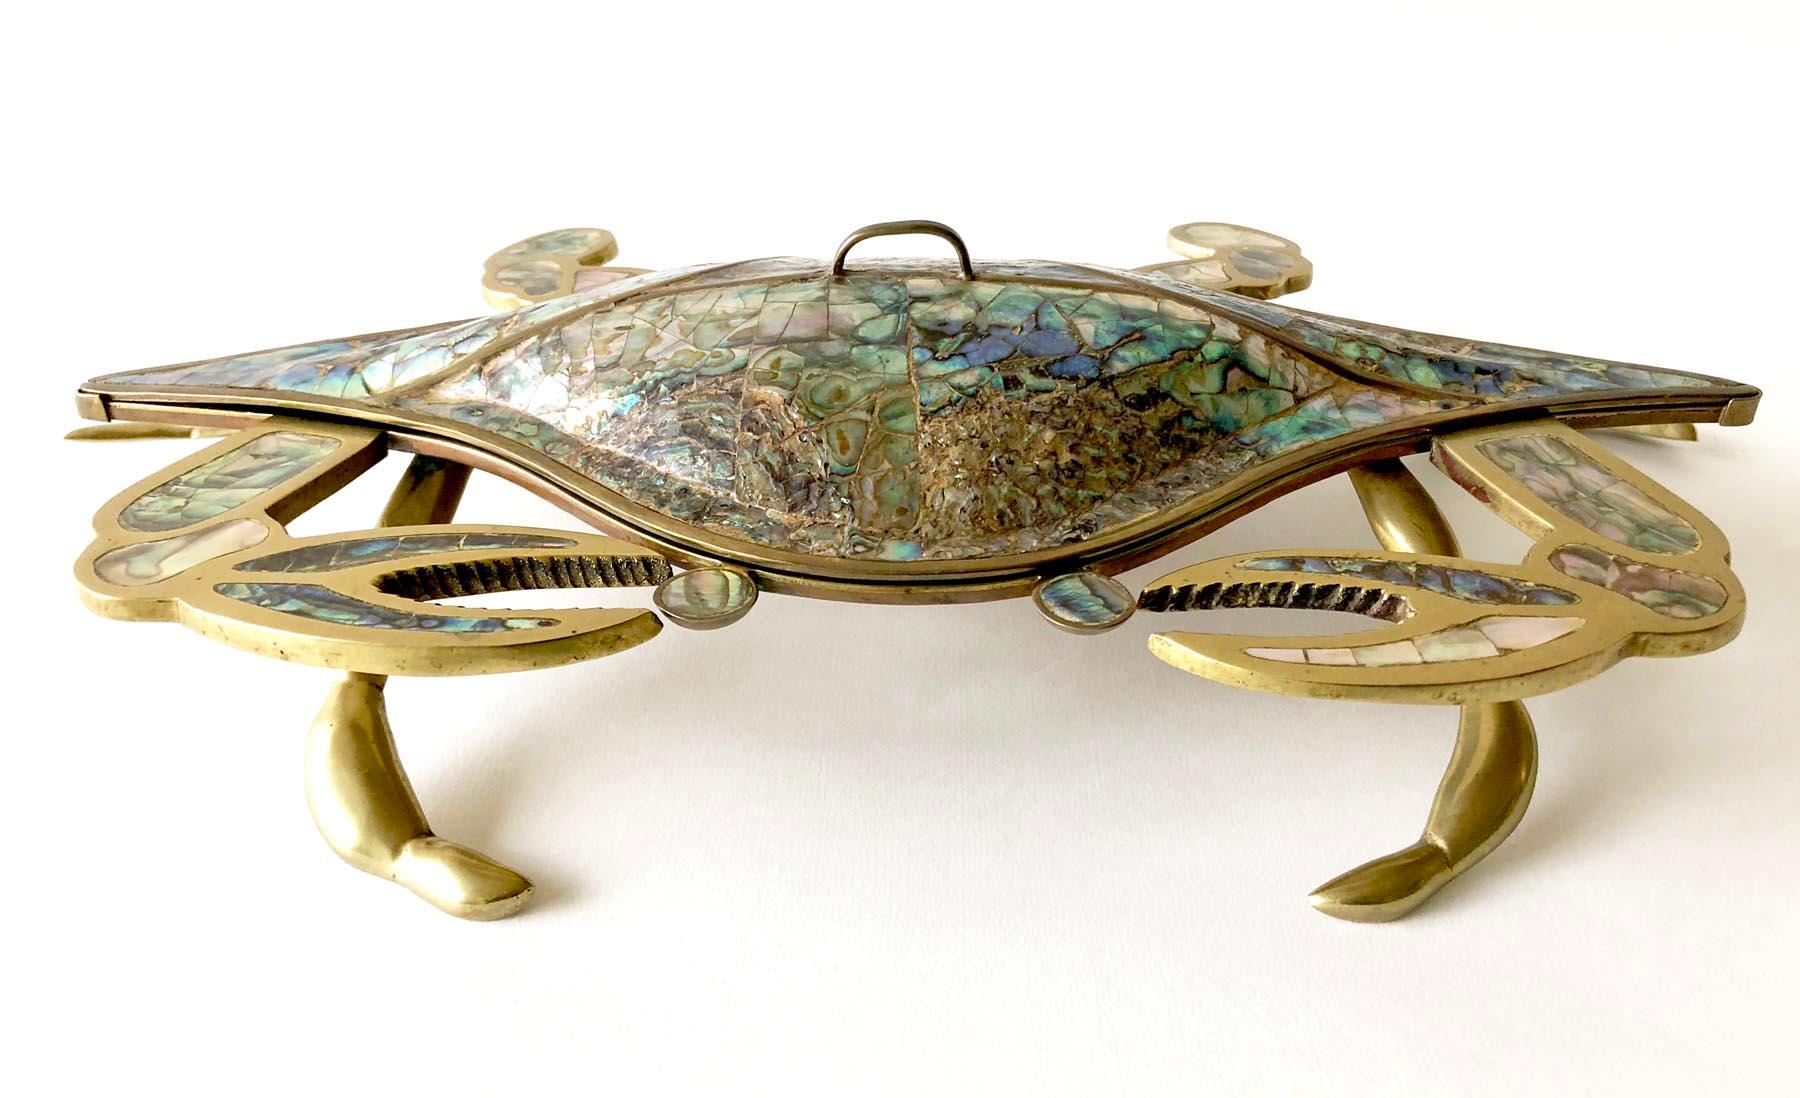 Inlaid abalone and brass covered tray, circa 1950's - 1960's. Crab measures 3